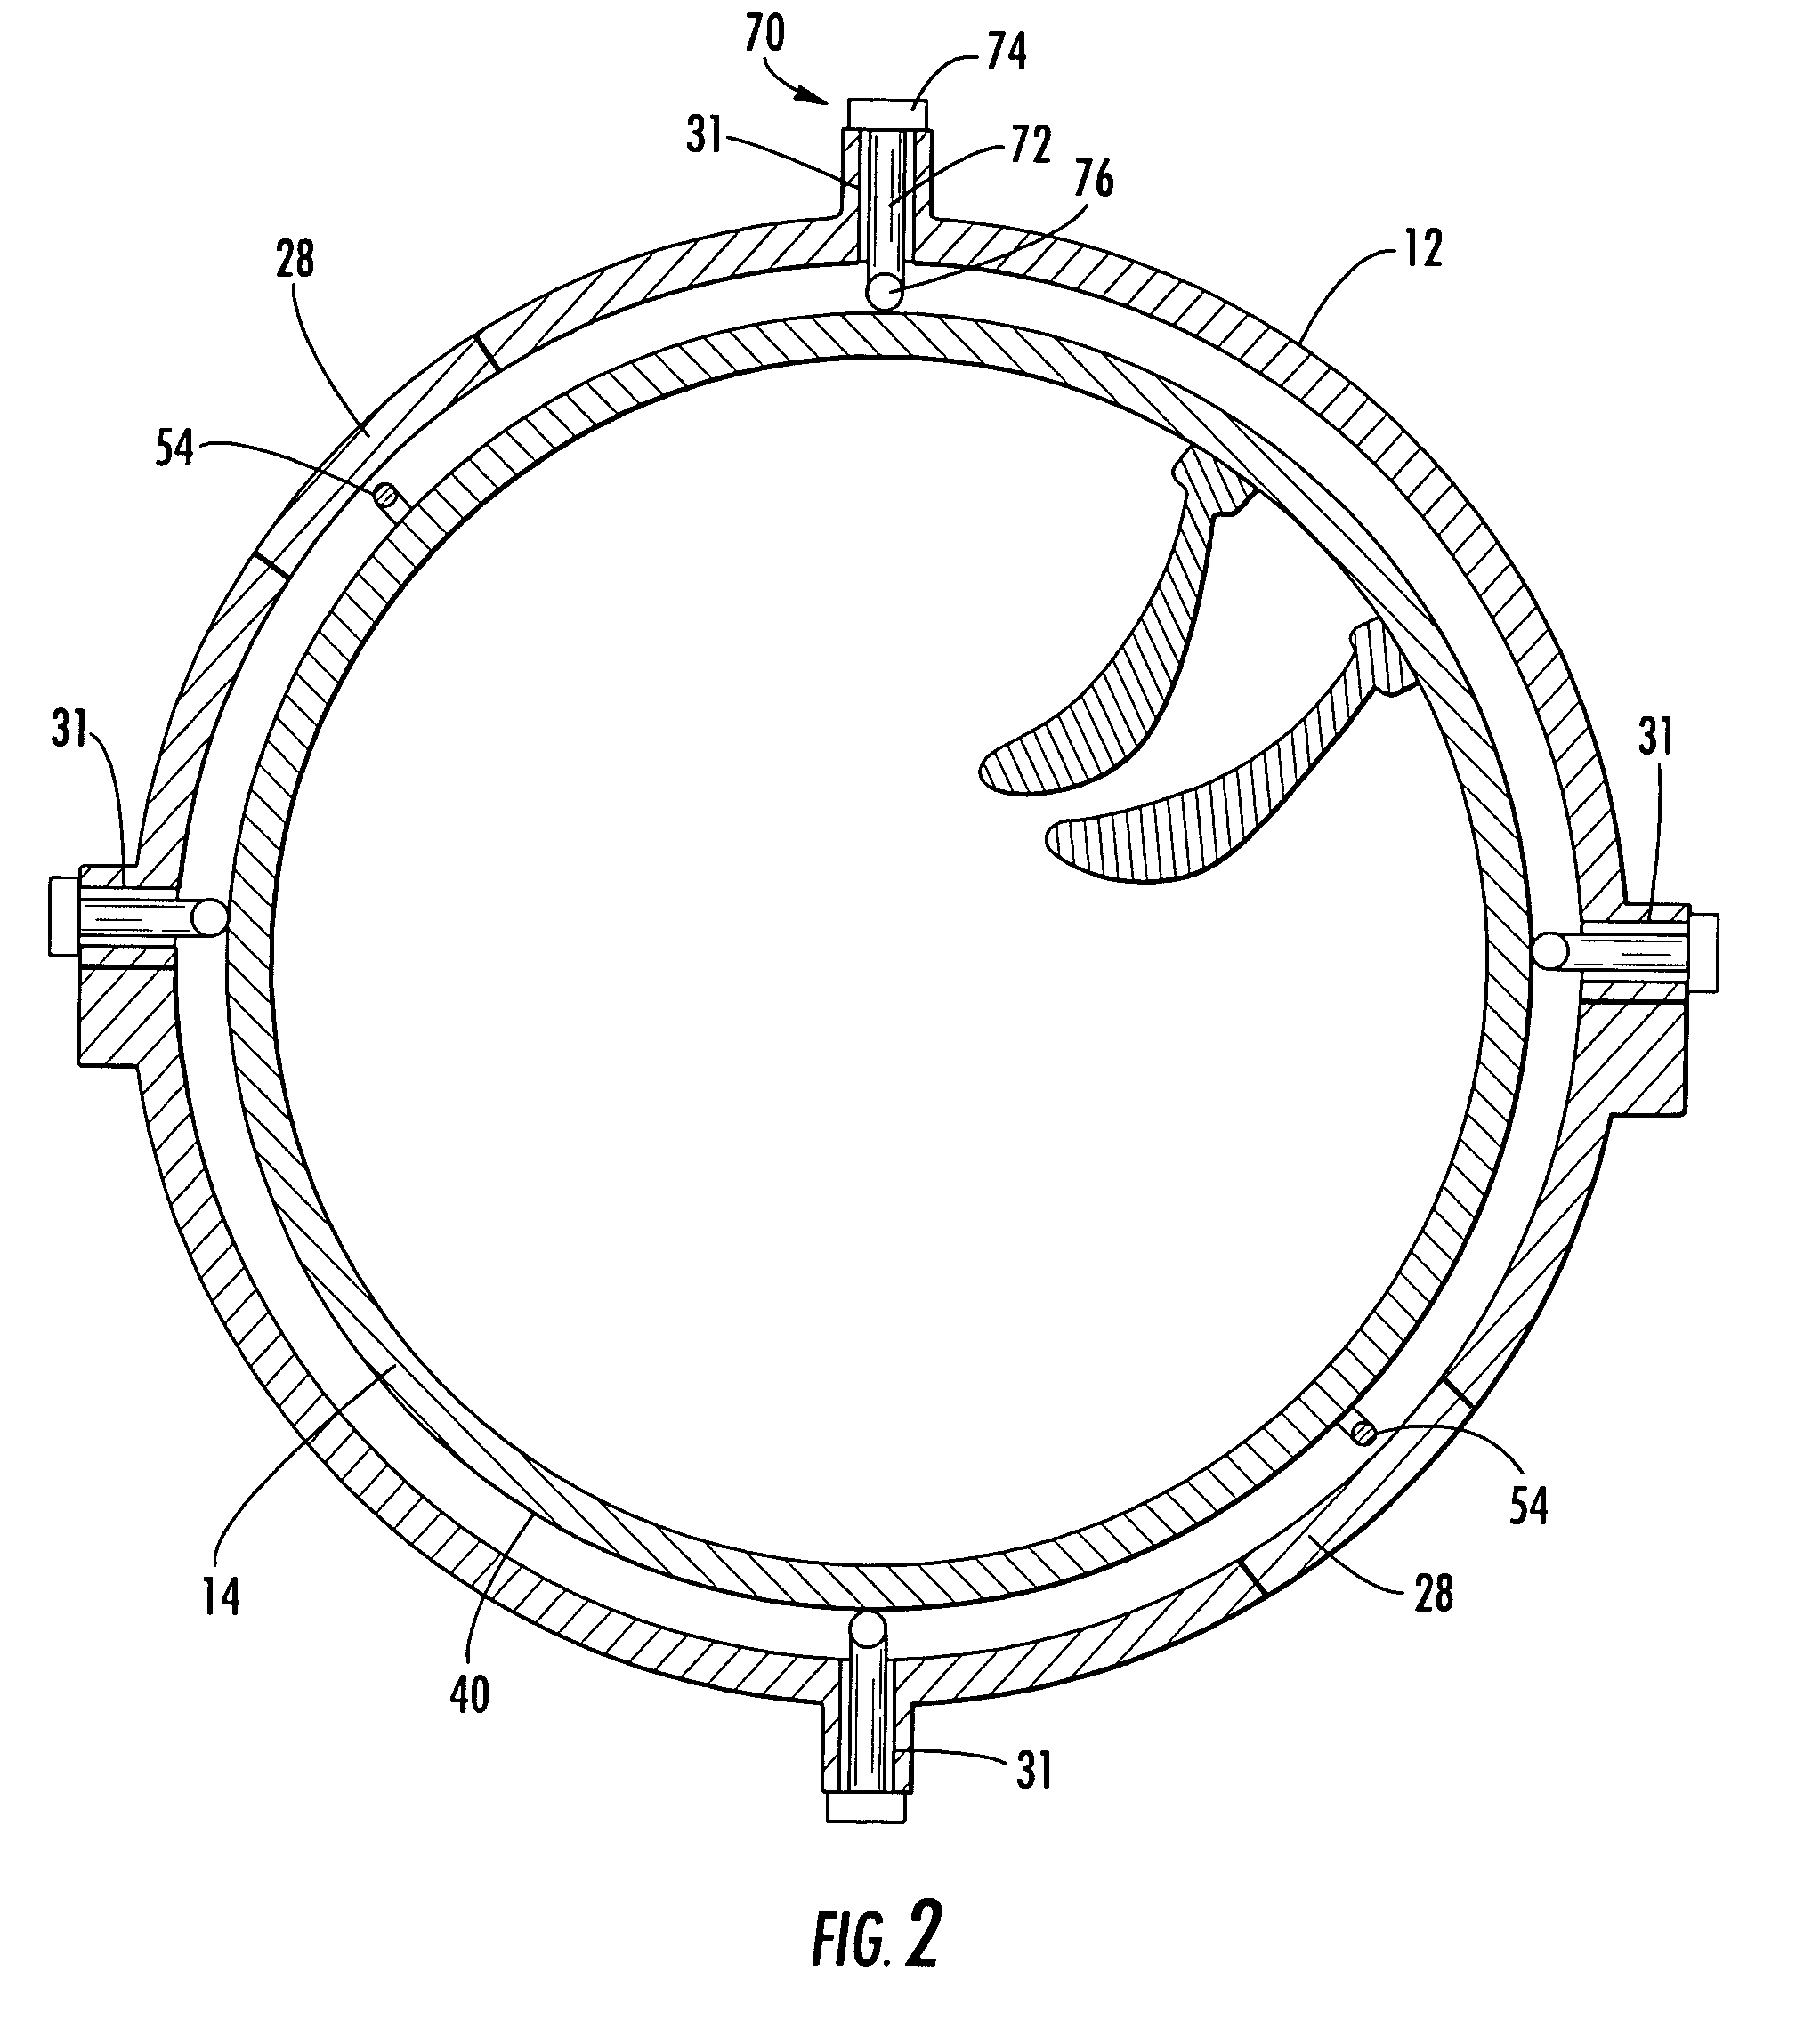 Turbine blade ring assembly and clocking method